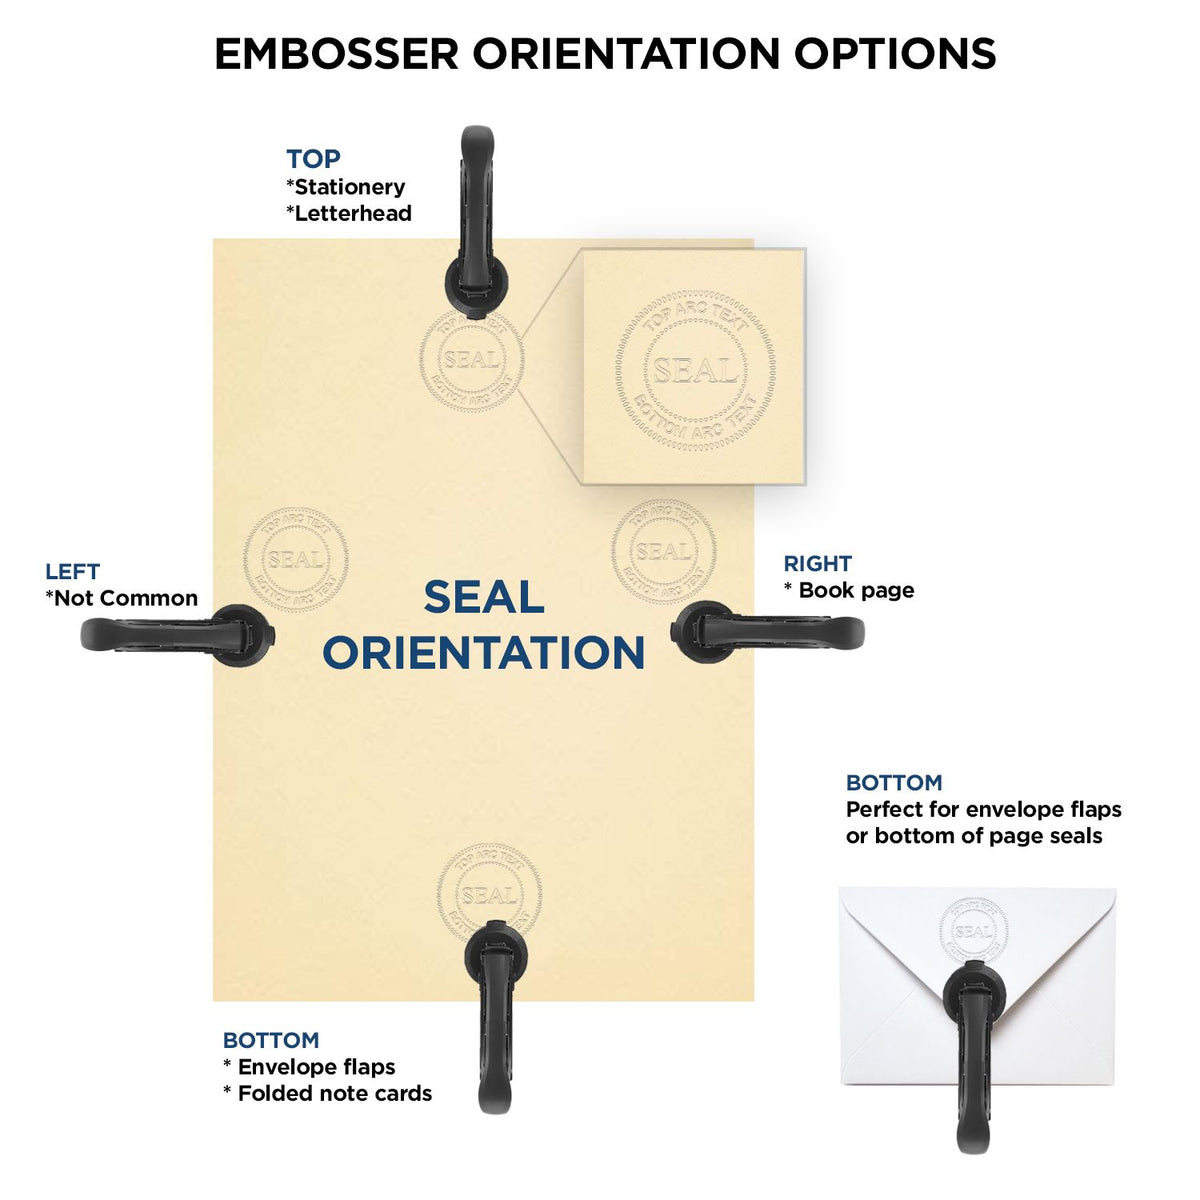 An infographic for the State of New Jersey Soft Land Surveyor Embossing Seal showing embosser orientation, this is showing examples of a top, bottom, right and left insert.